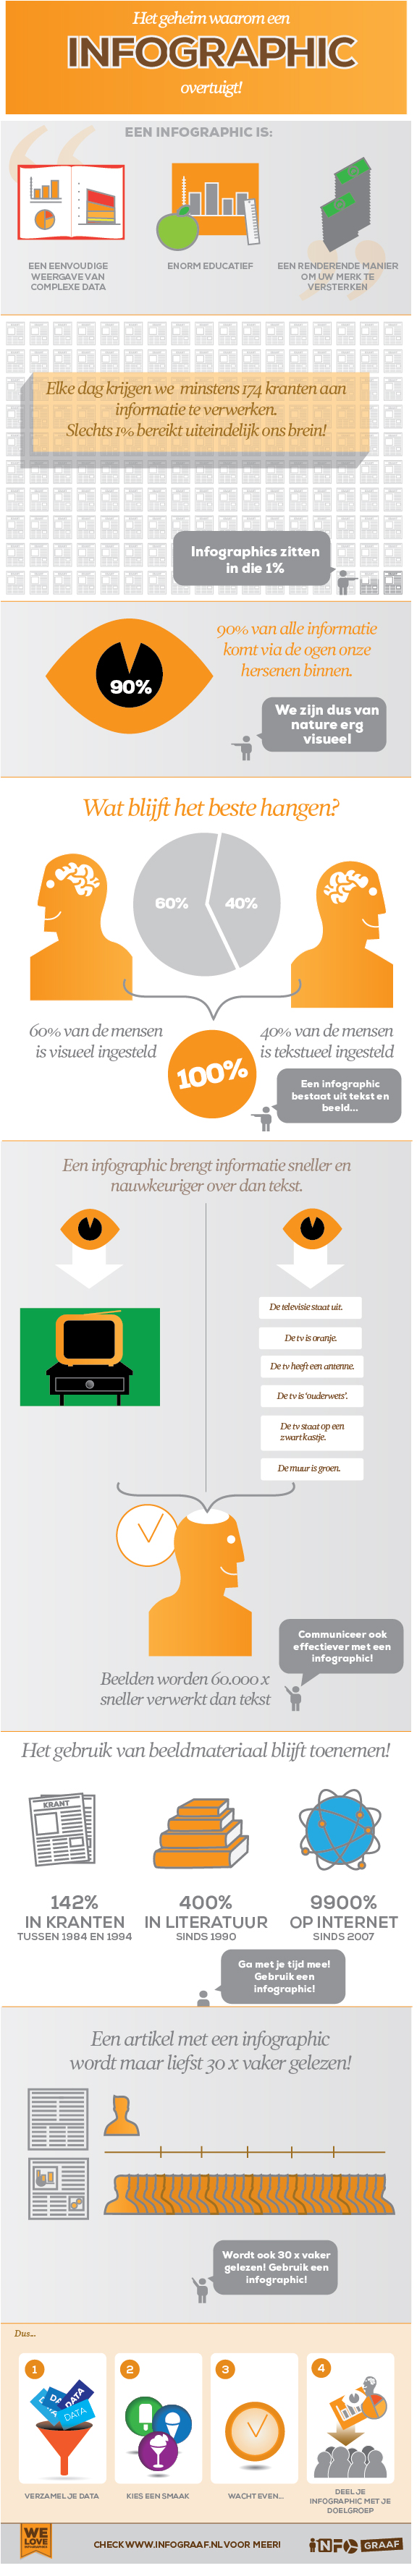 Infographic over infographics